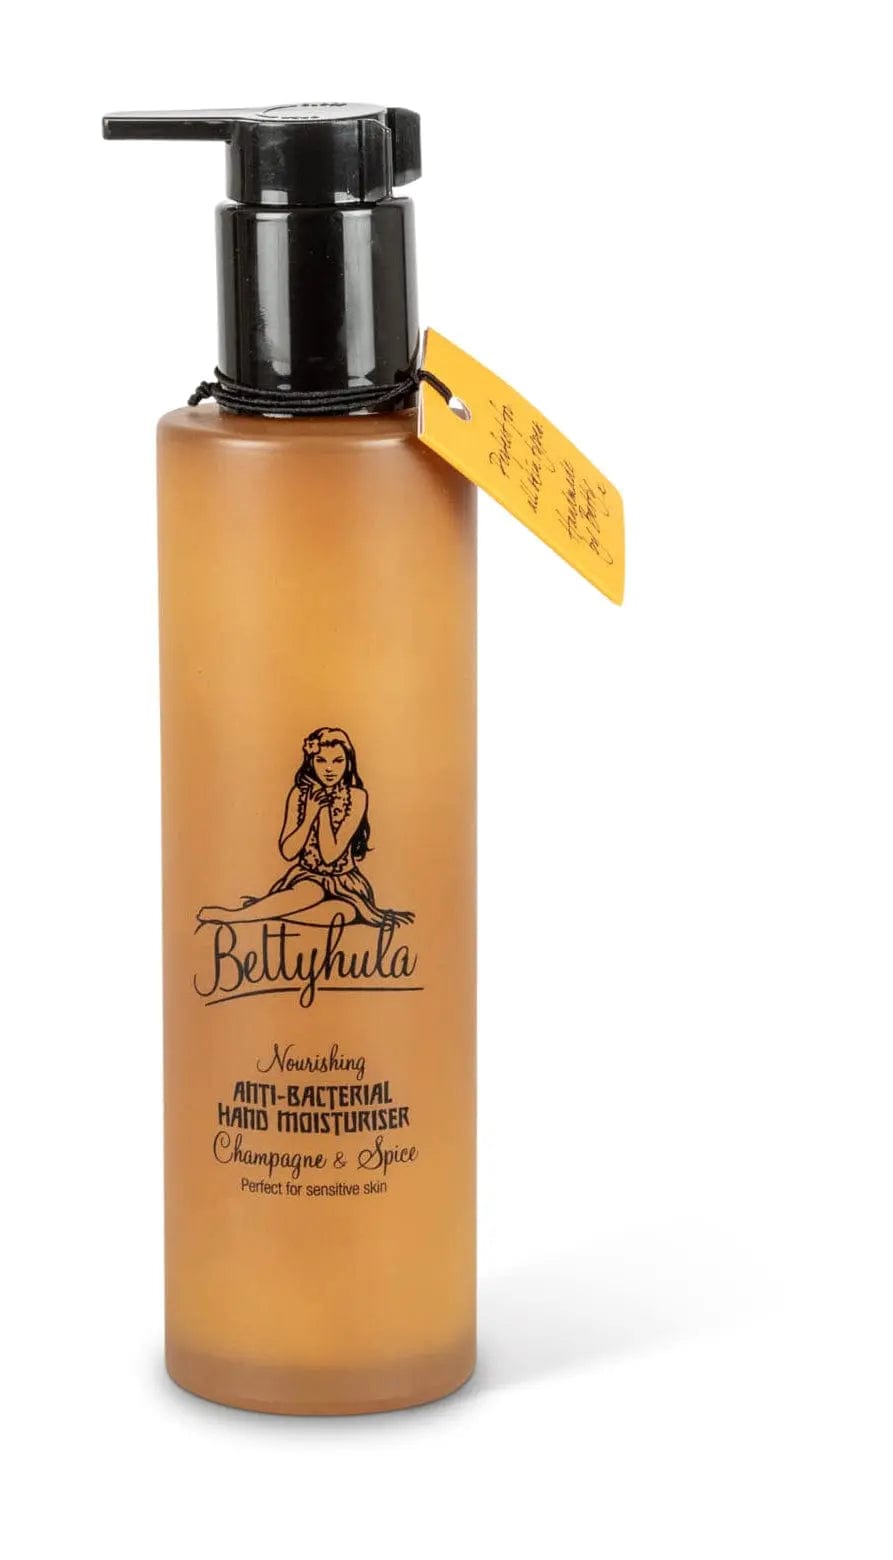 Betty Hula Nourishing Anti-bacterial Hand Cream Bottle - Champagne And Spice